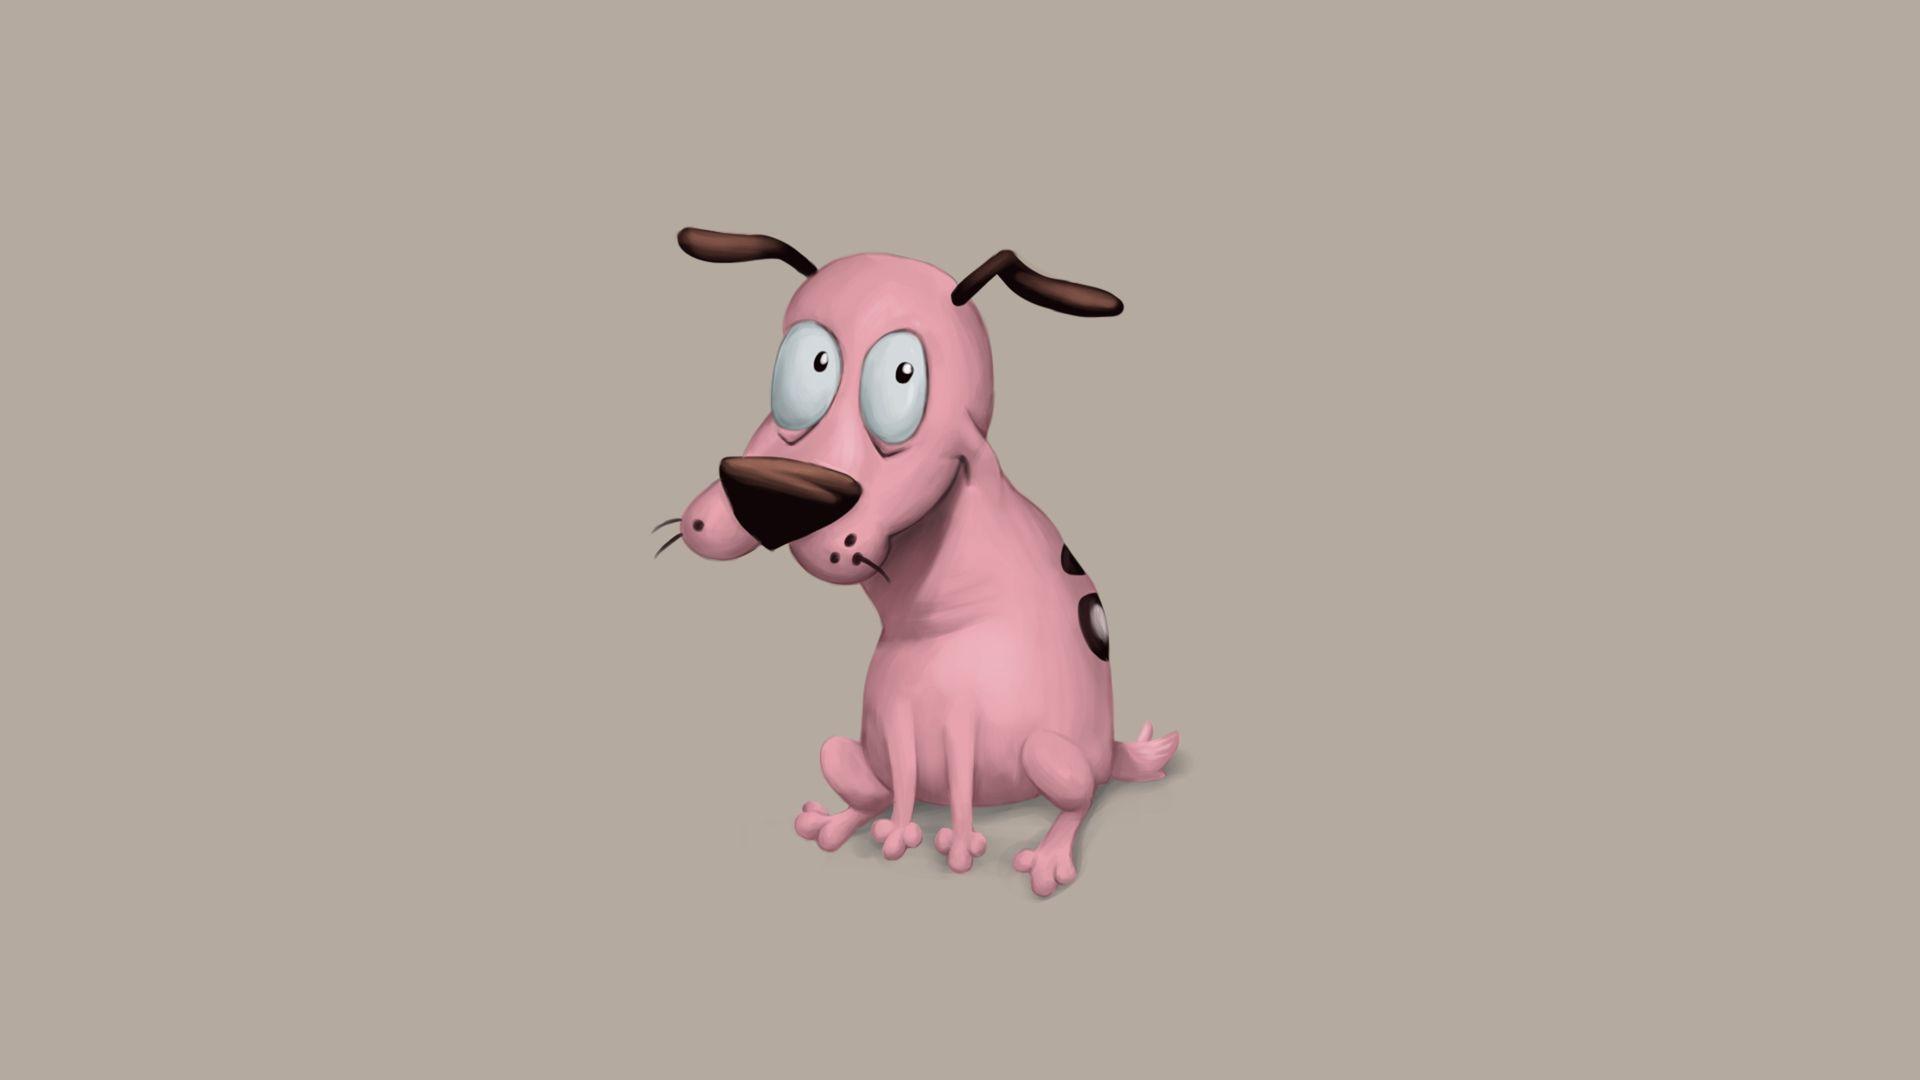 Download Wallpaper 1920x1080 Courage cowardly dog, Dog